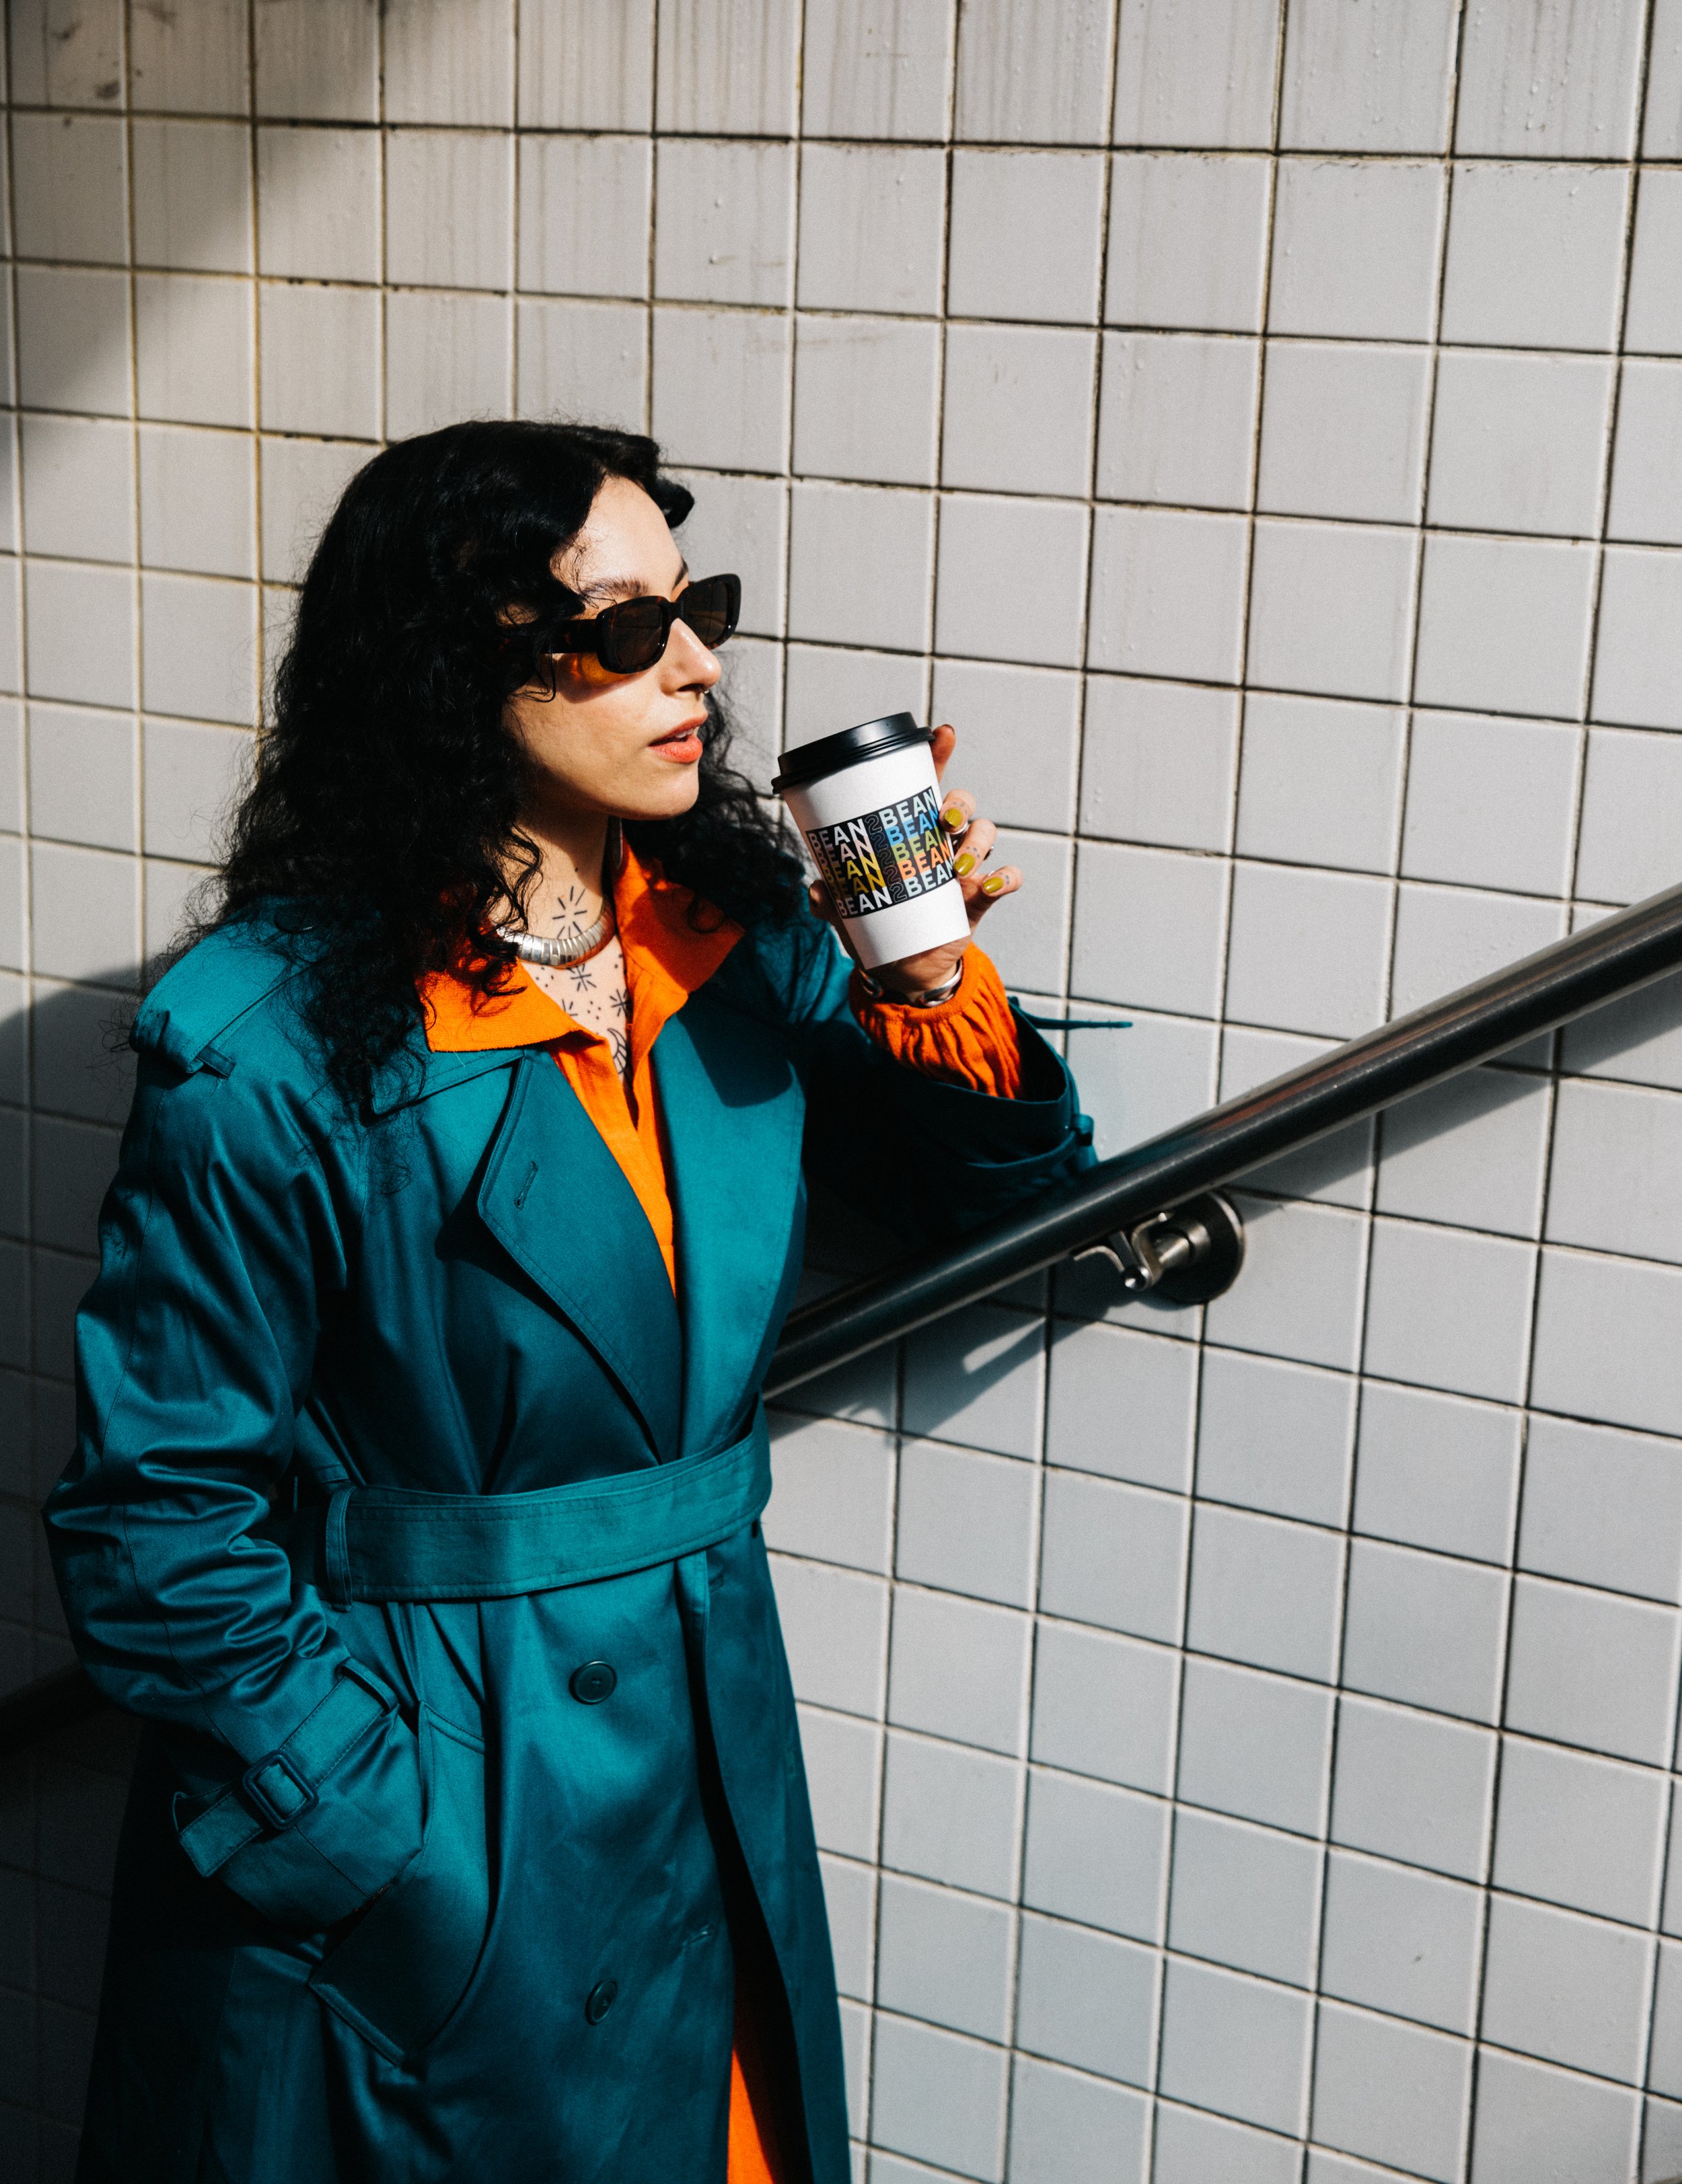 Drinking Bean2Bean Coffee on the Subway Stairs in NYC, Photo by Corey Jermaine